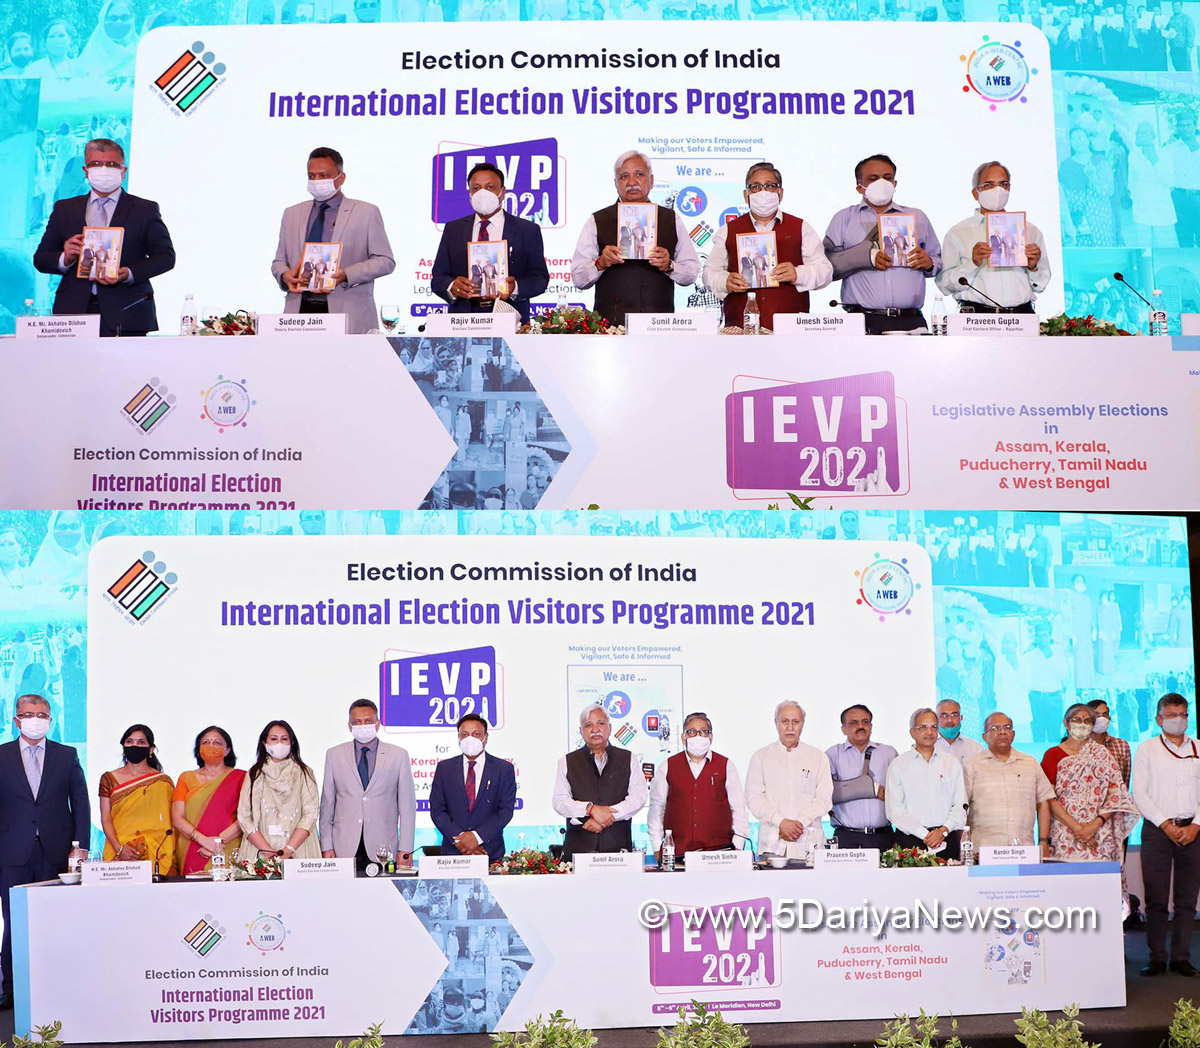   ECI, Election Commission of India, International Virtual Election Visitors Programme, IEVP, Election Management Bodies, Chief Election Commissioner, Sunil Arora